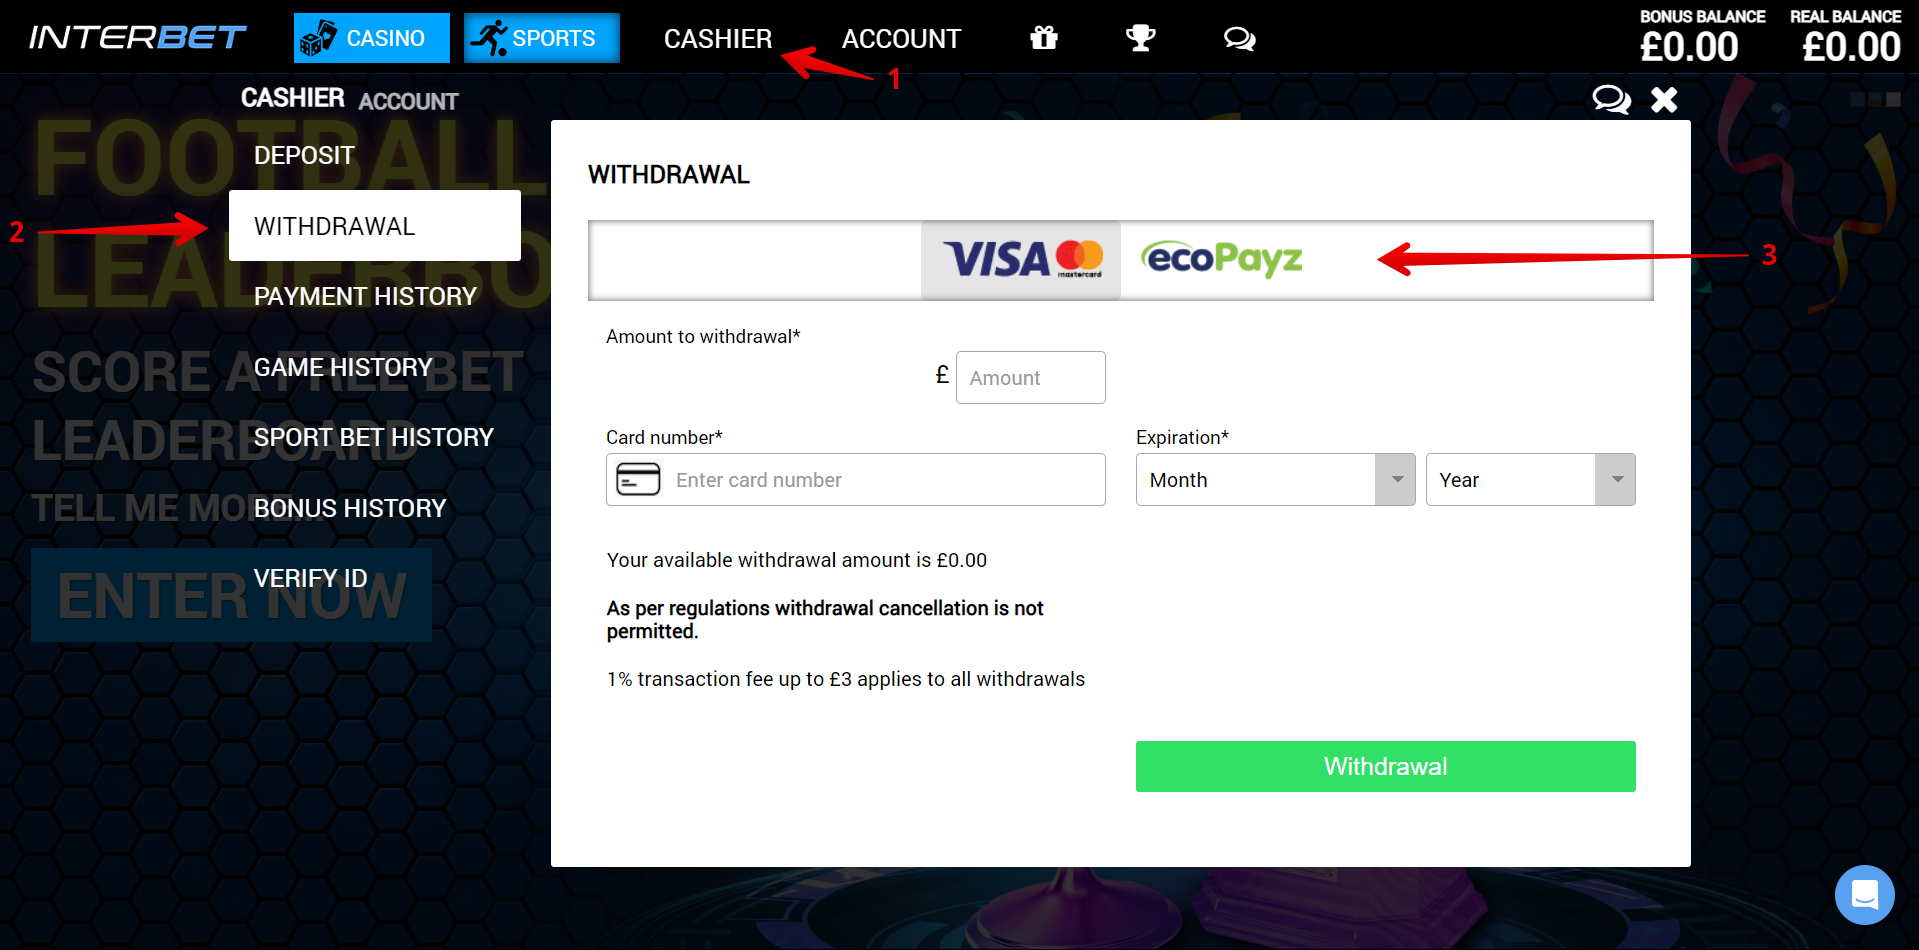 Select the withdrawal payment option